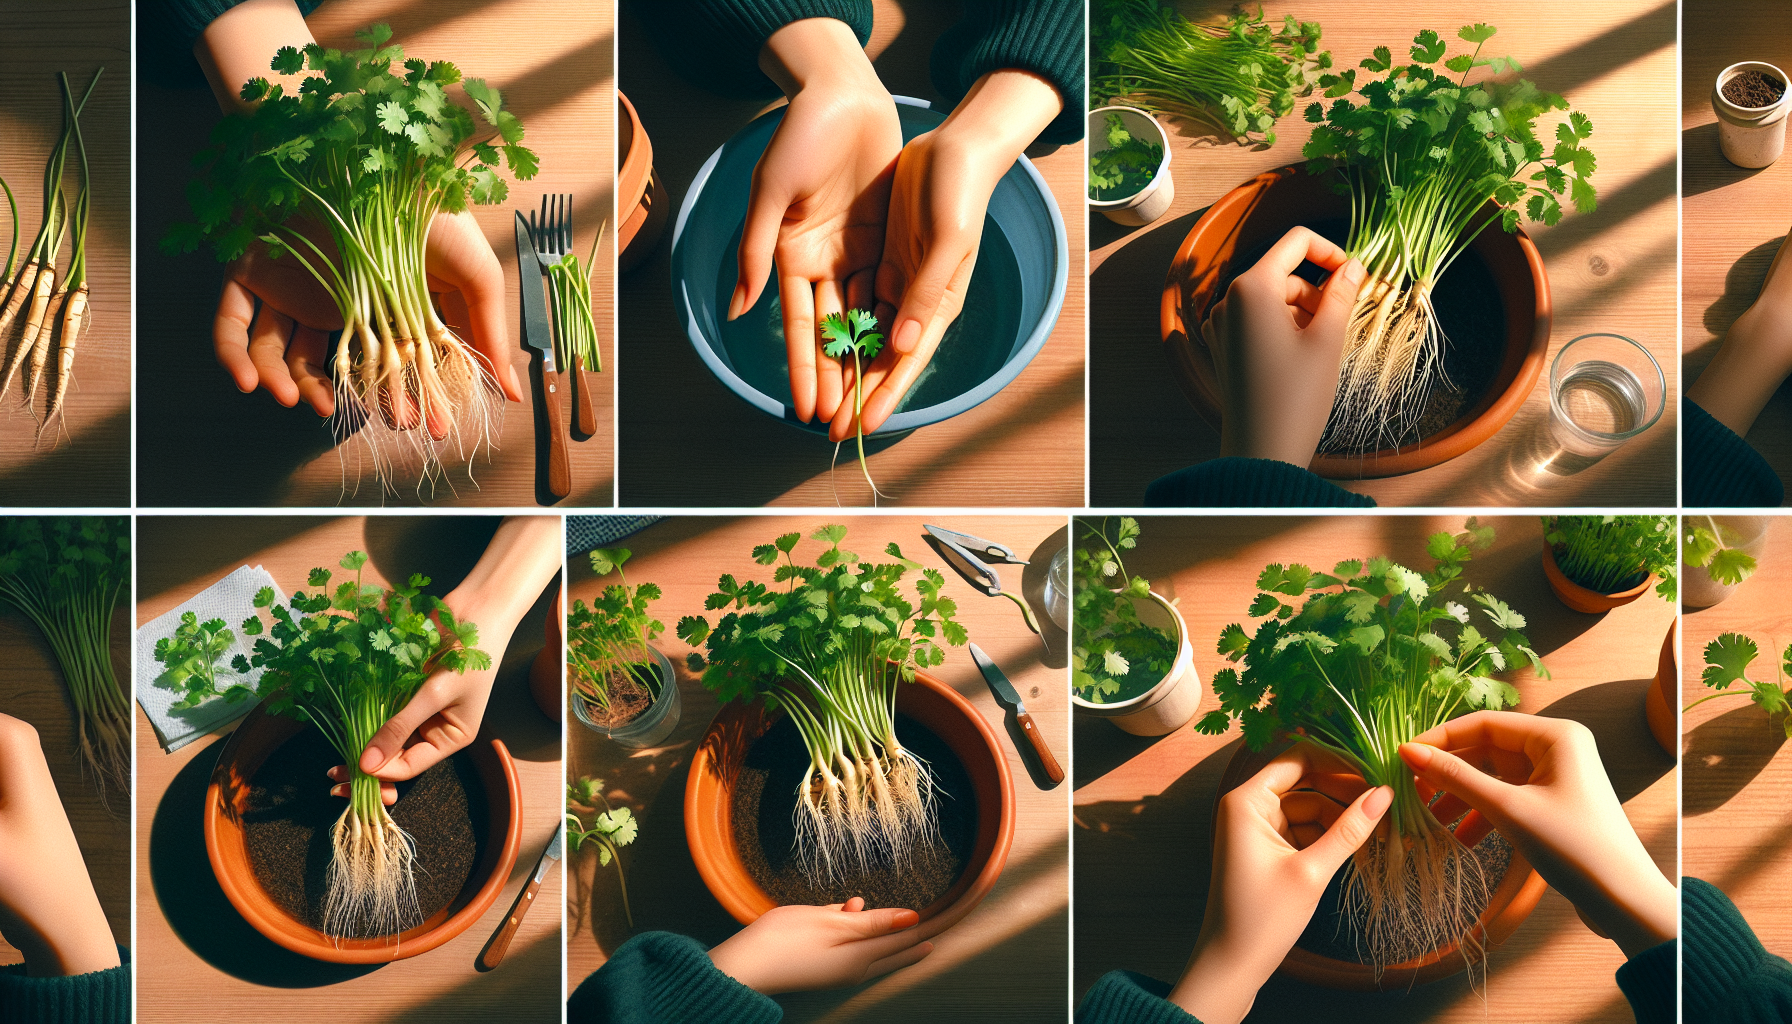 Grow your own cilantro from grocery store cuttings - a guide for sustainable gardening